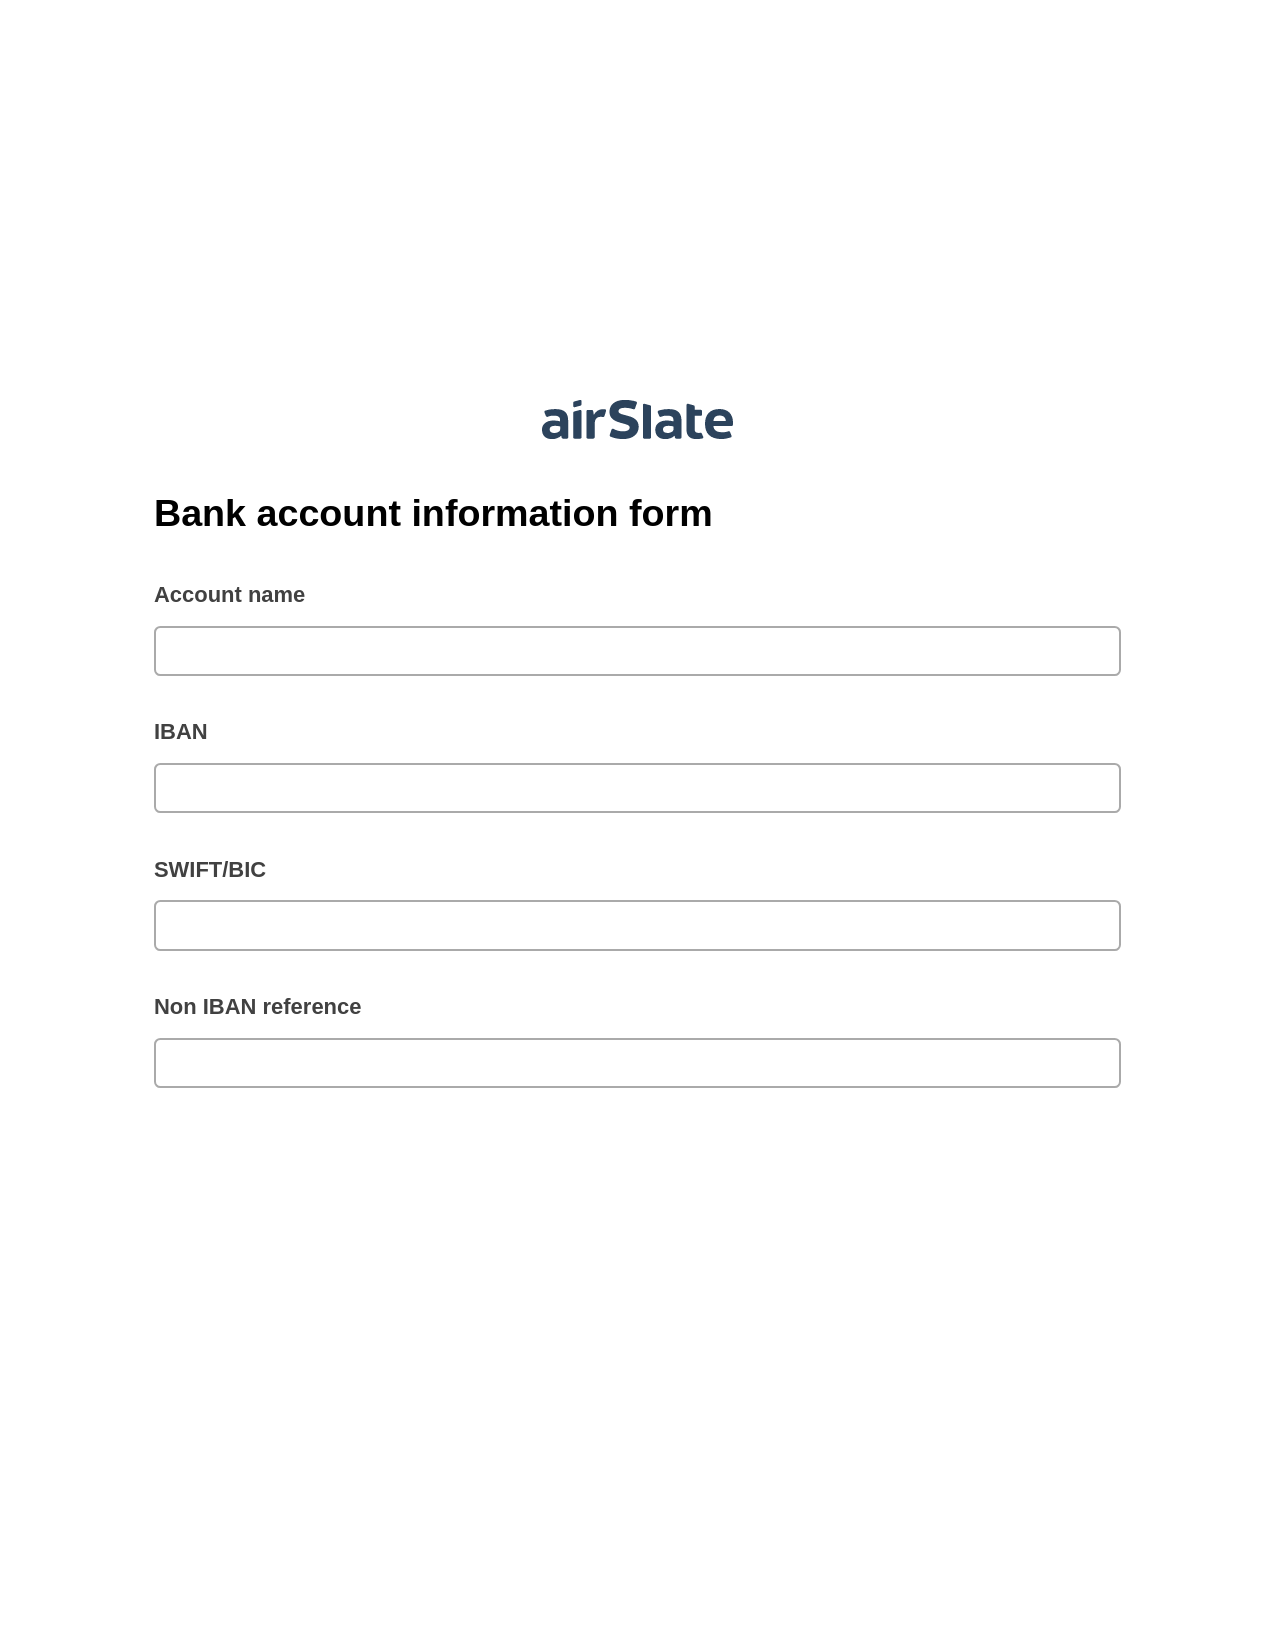 Multirole Bank account information form Pre-fill from CSV File Dropdown Options Bot, Update Salesforce Record Bot, Export to Salesforce Bot